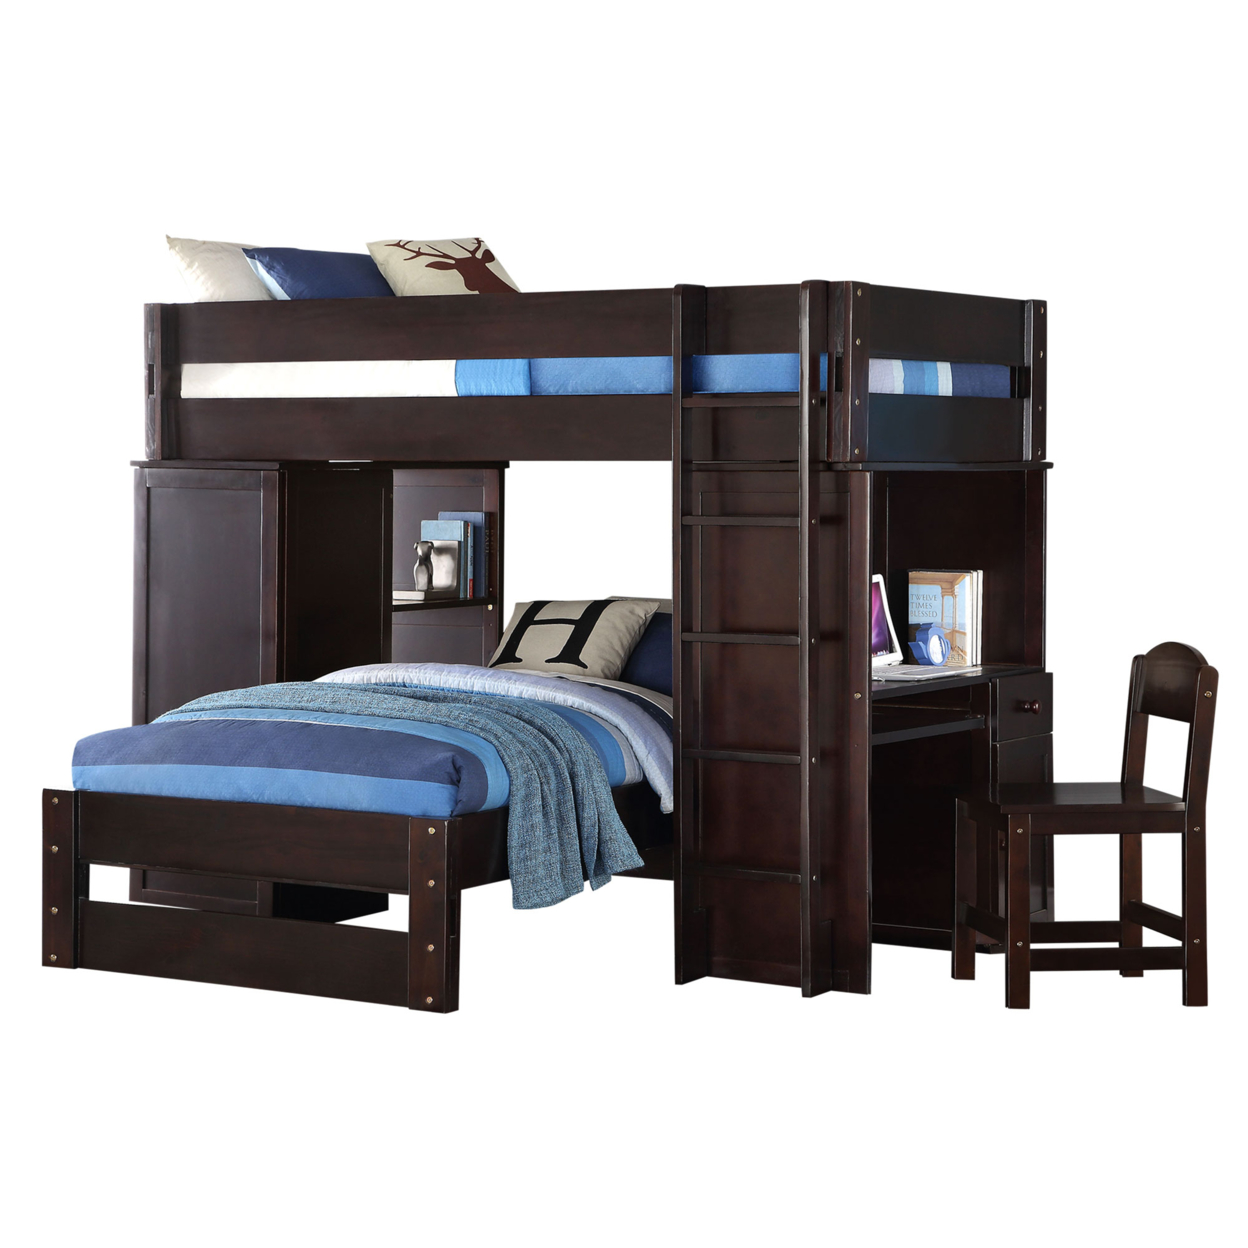 Wooden Loft Bed With Twin Size Bed And Wardrobe Space, Brown- Saltoro Sherpi